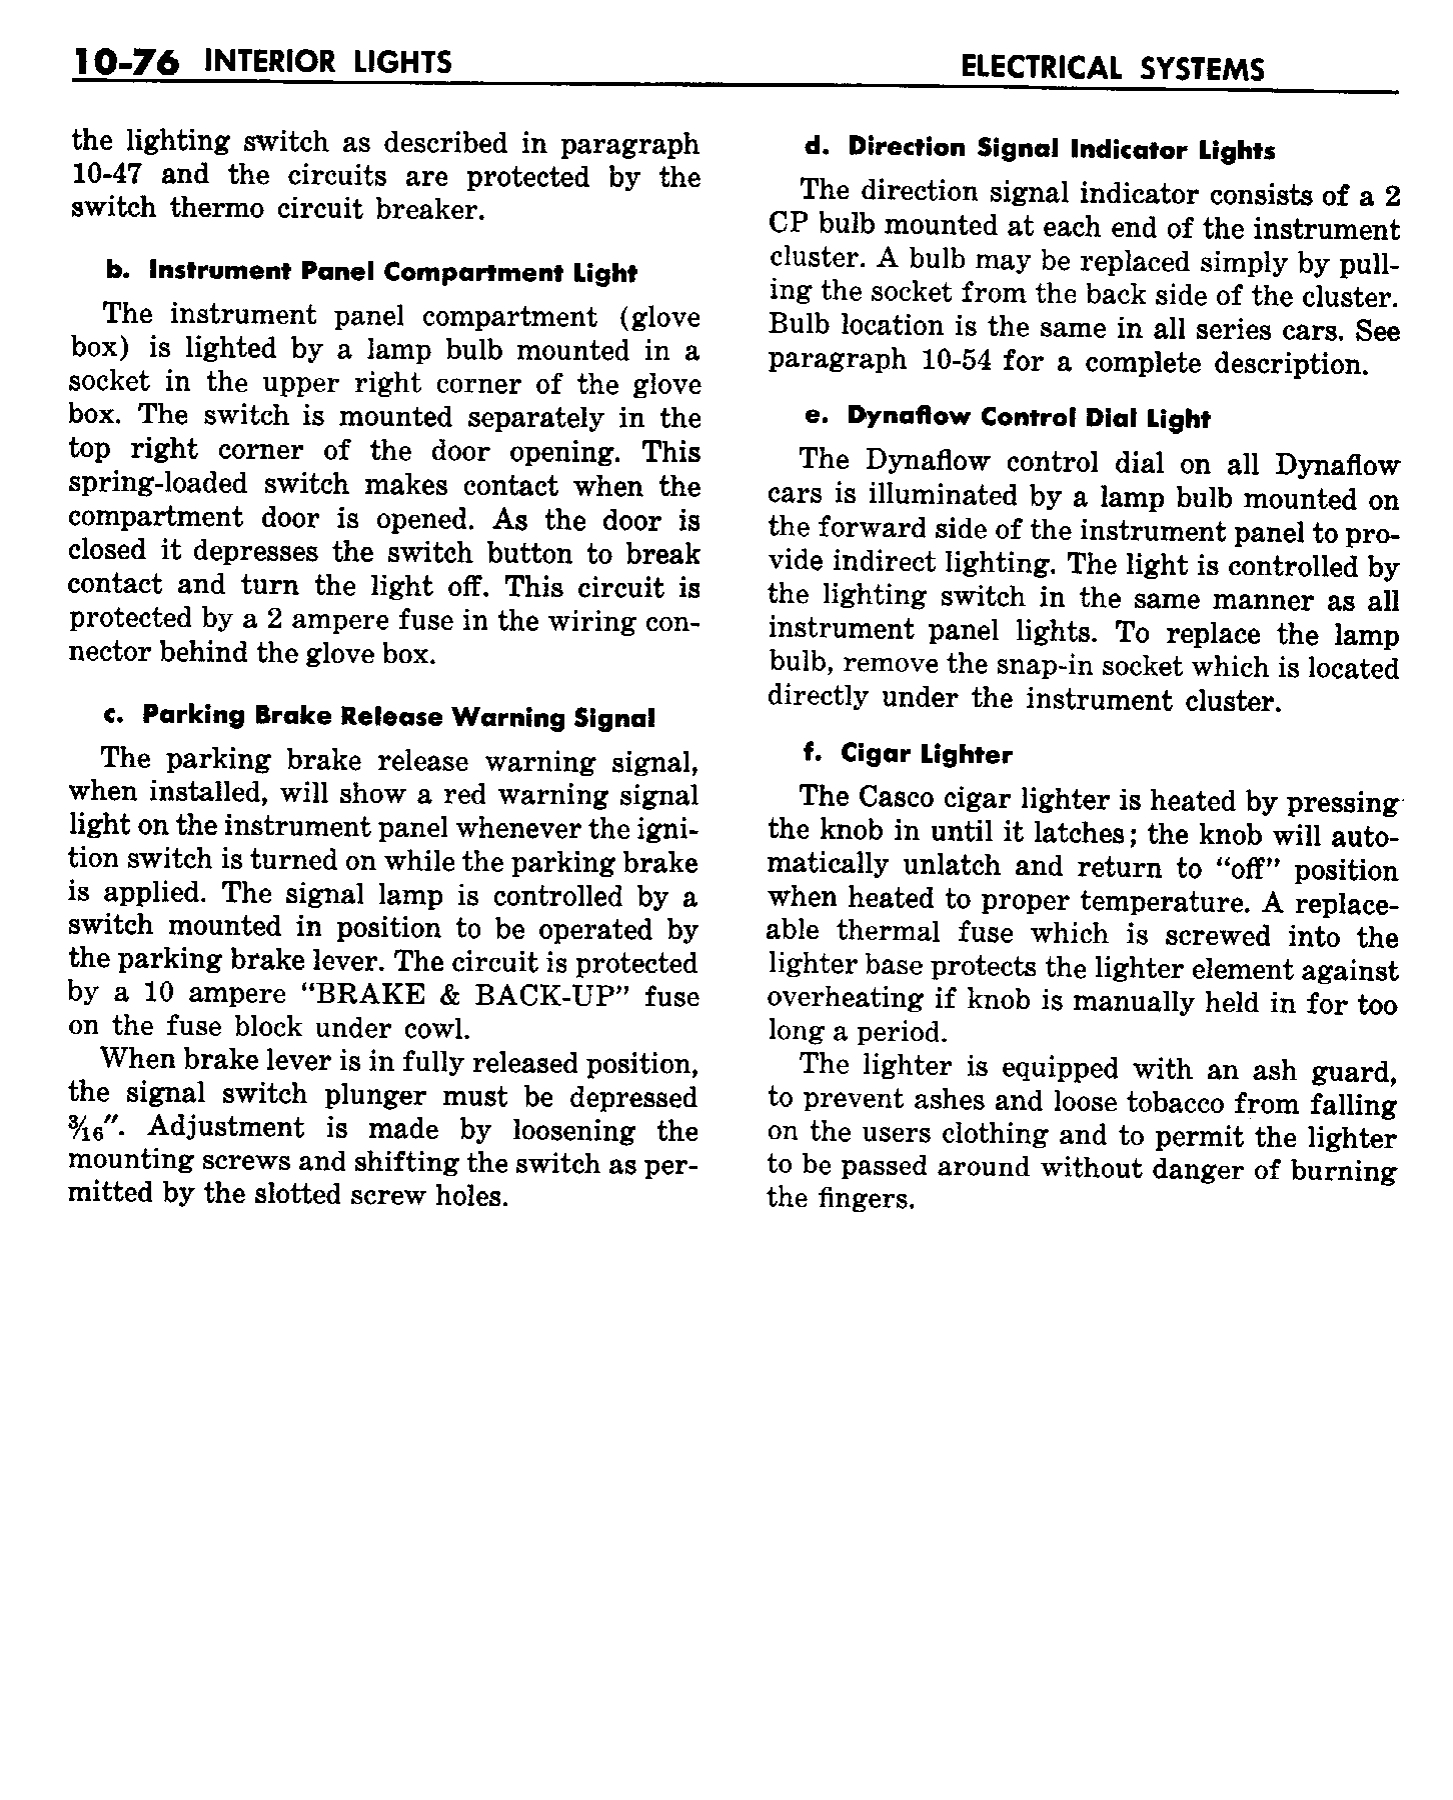 n_11 1958 Buick Shop Manual - Electrical Systems_76.jpg